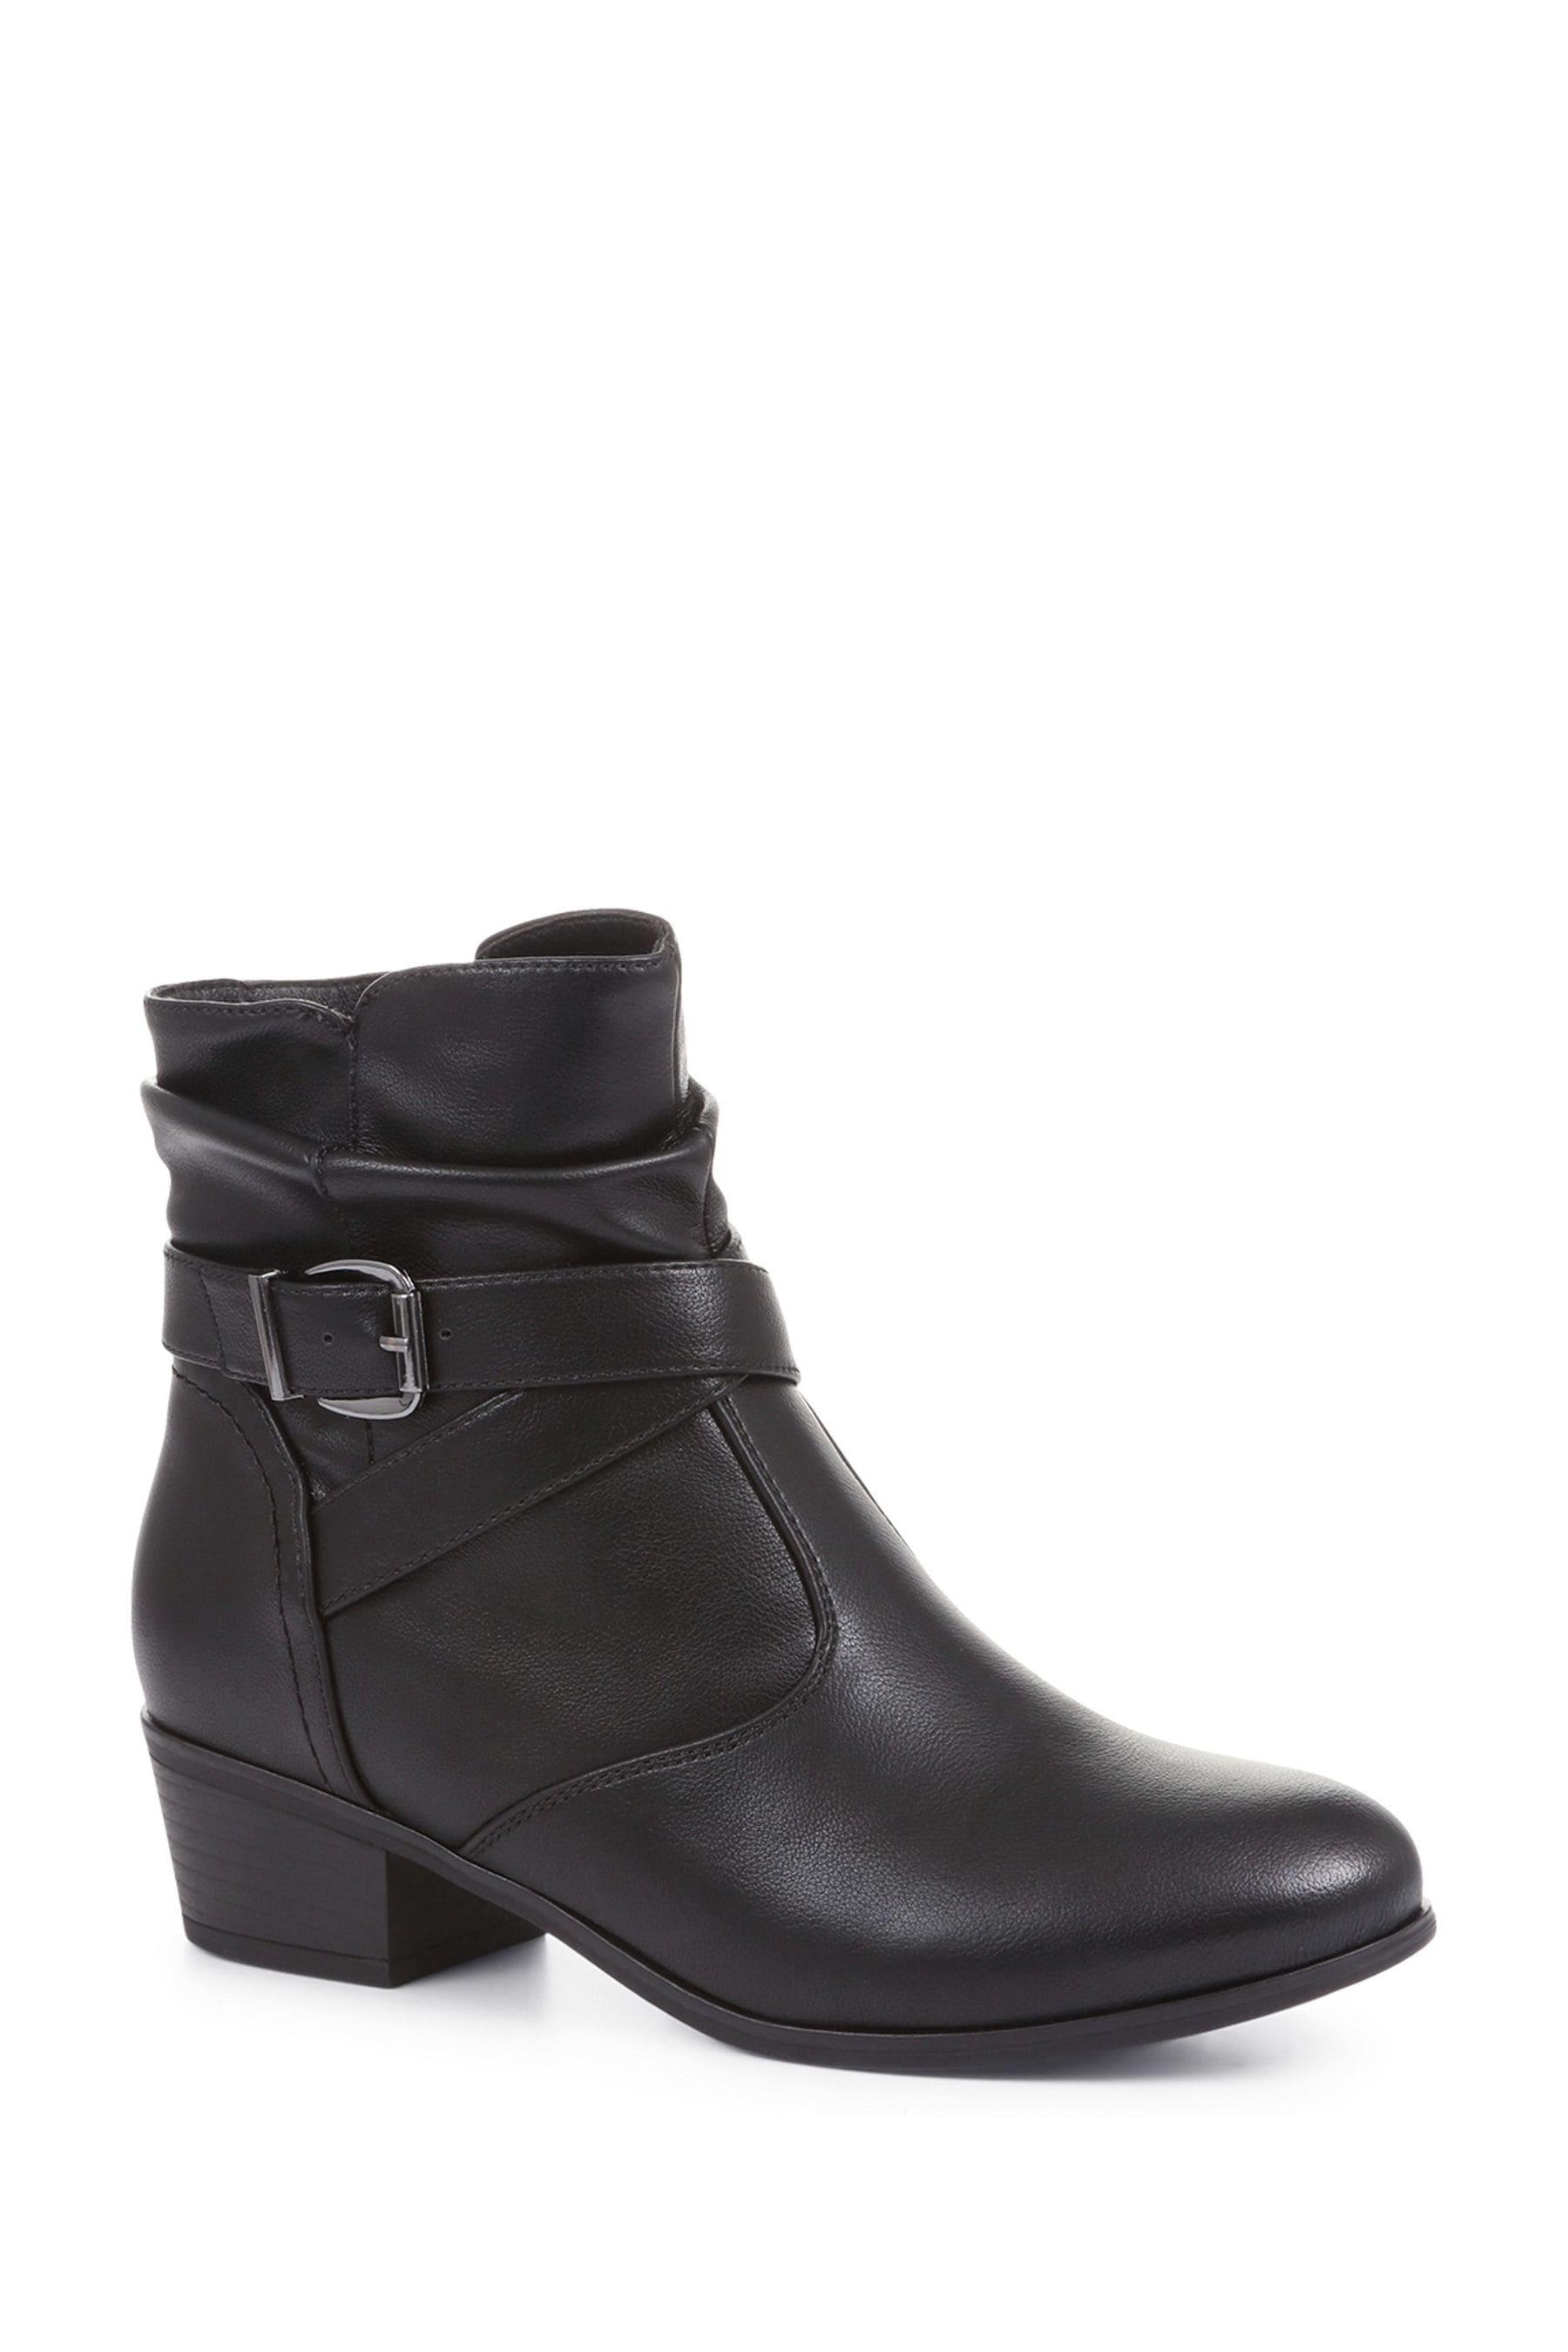 Buy Pavers Black Block Heeled Ankle Boots from the Next UK online shop